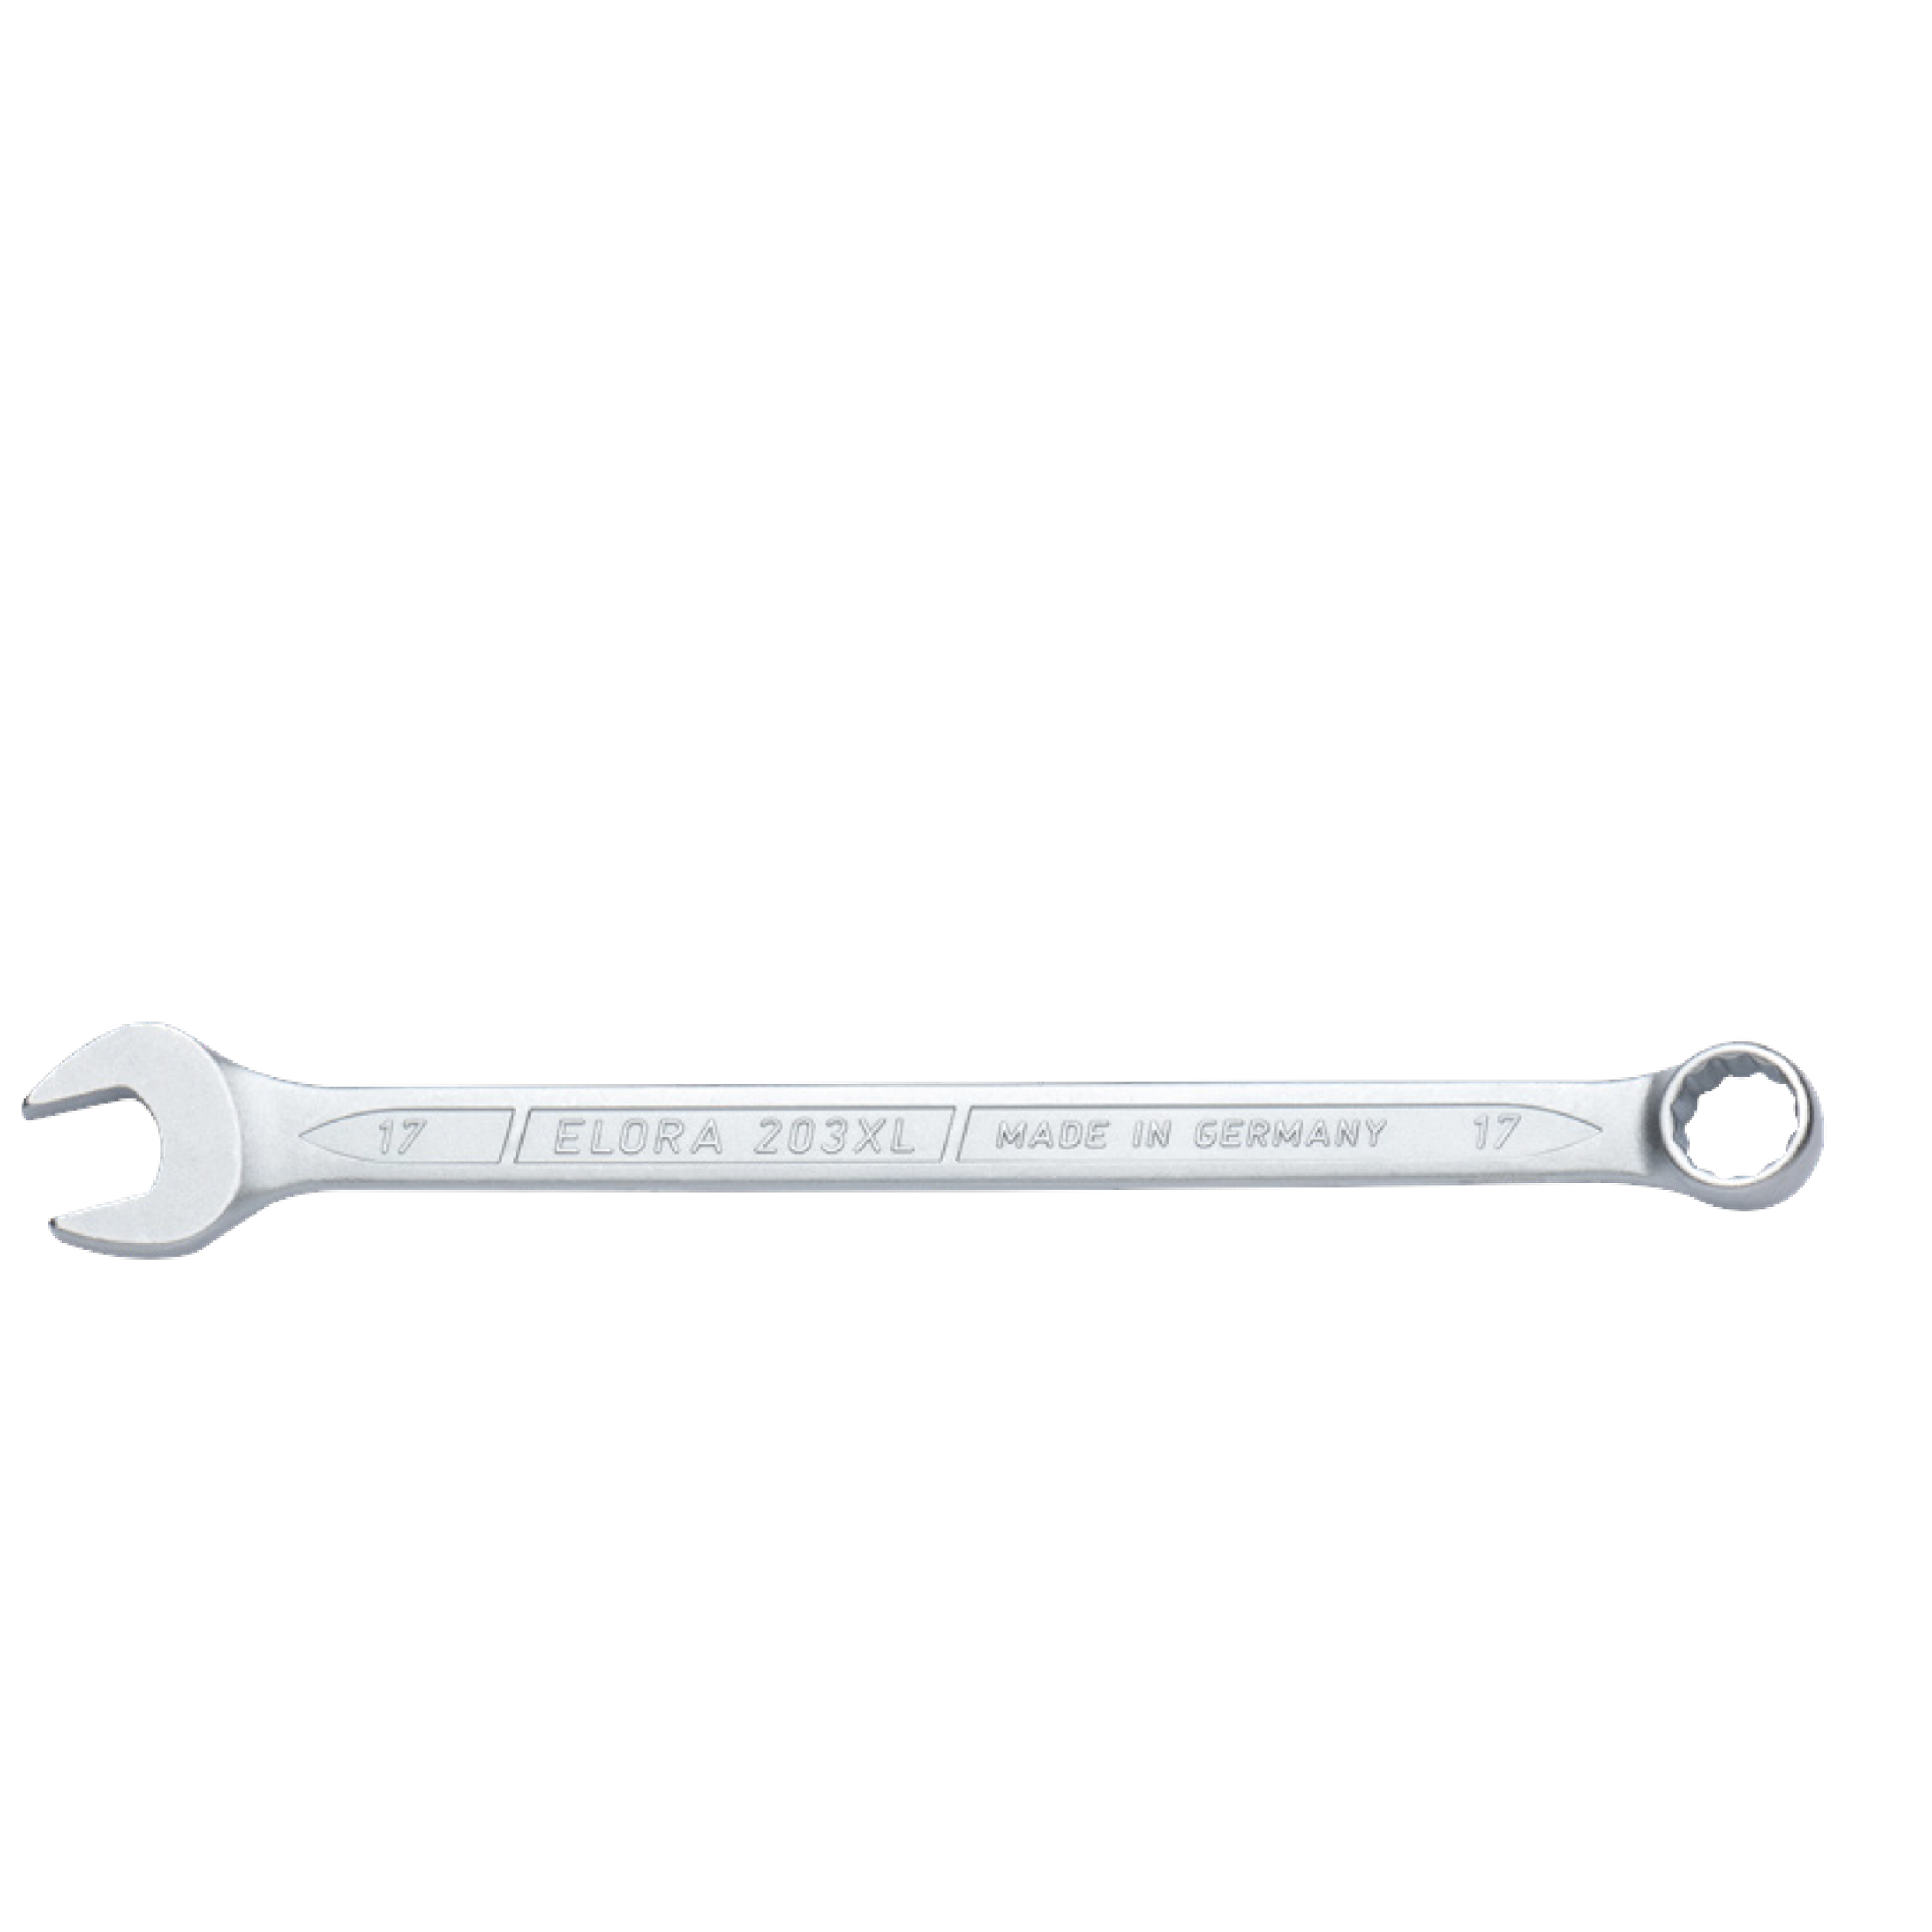 ELORA OMS-30 Module Combination Spanner Ratchet (ELORA Tools) - Premium Combination Spanner from ELORA - Shop now at Yew Aik.